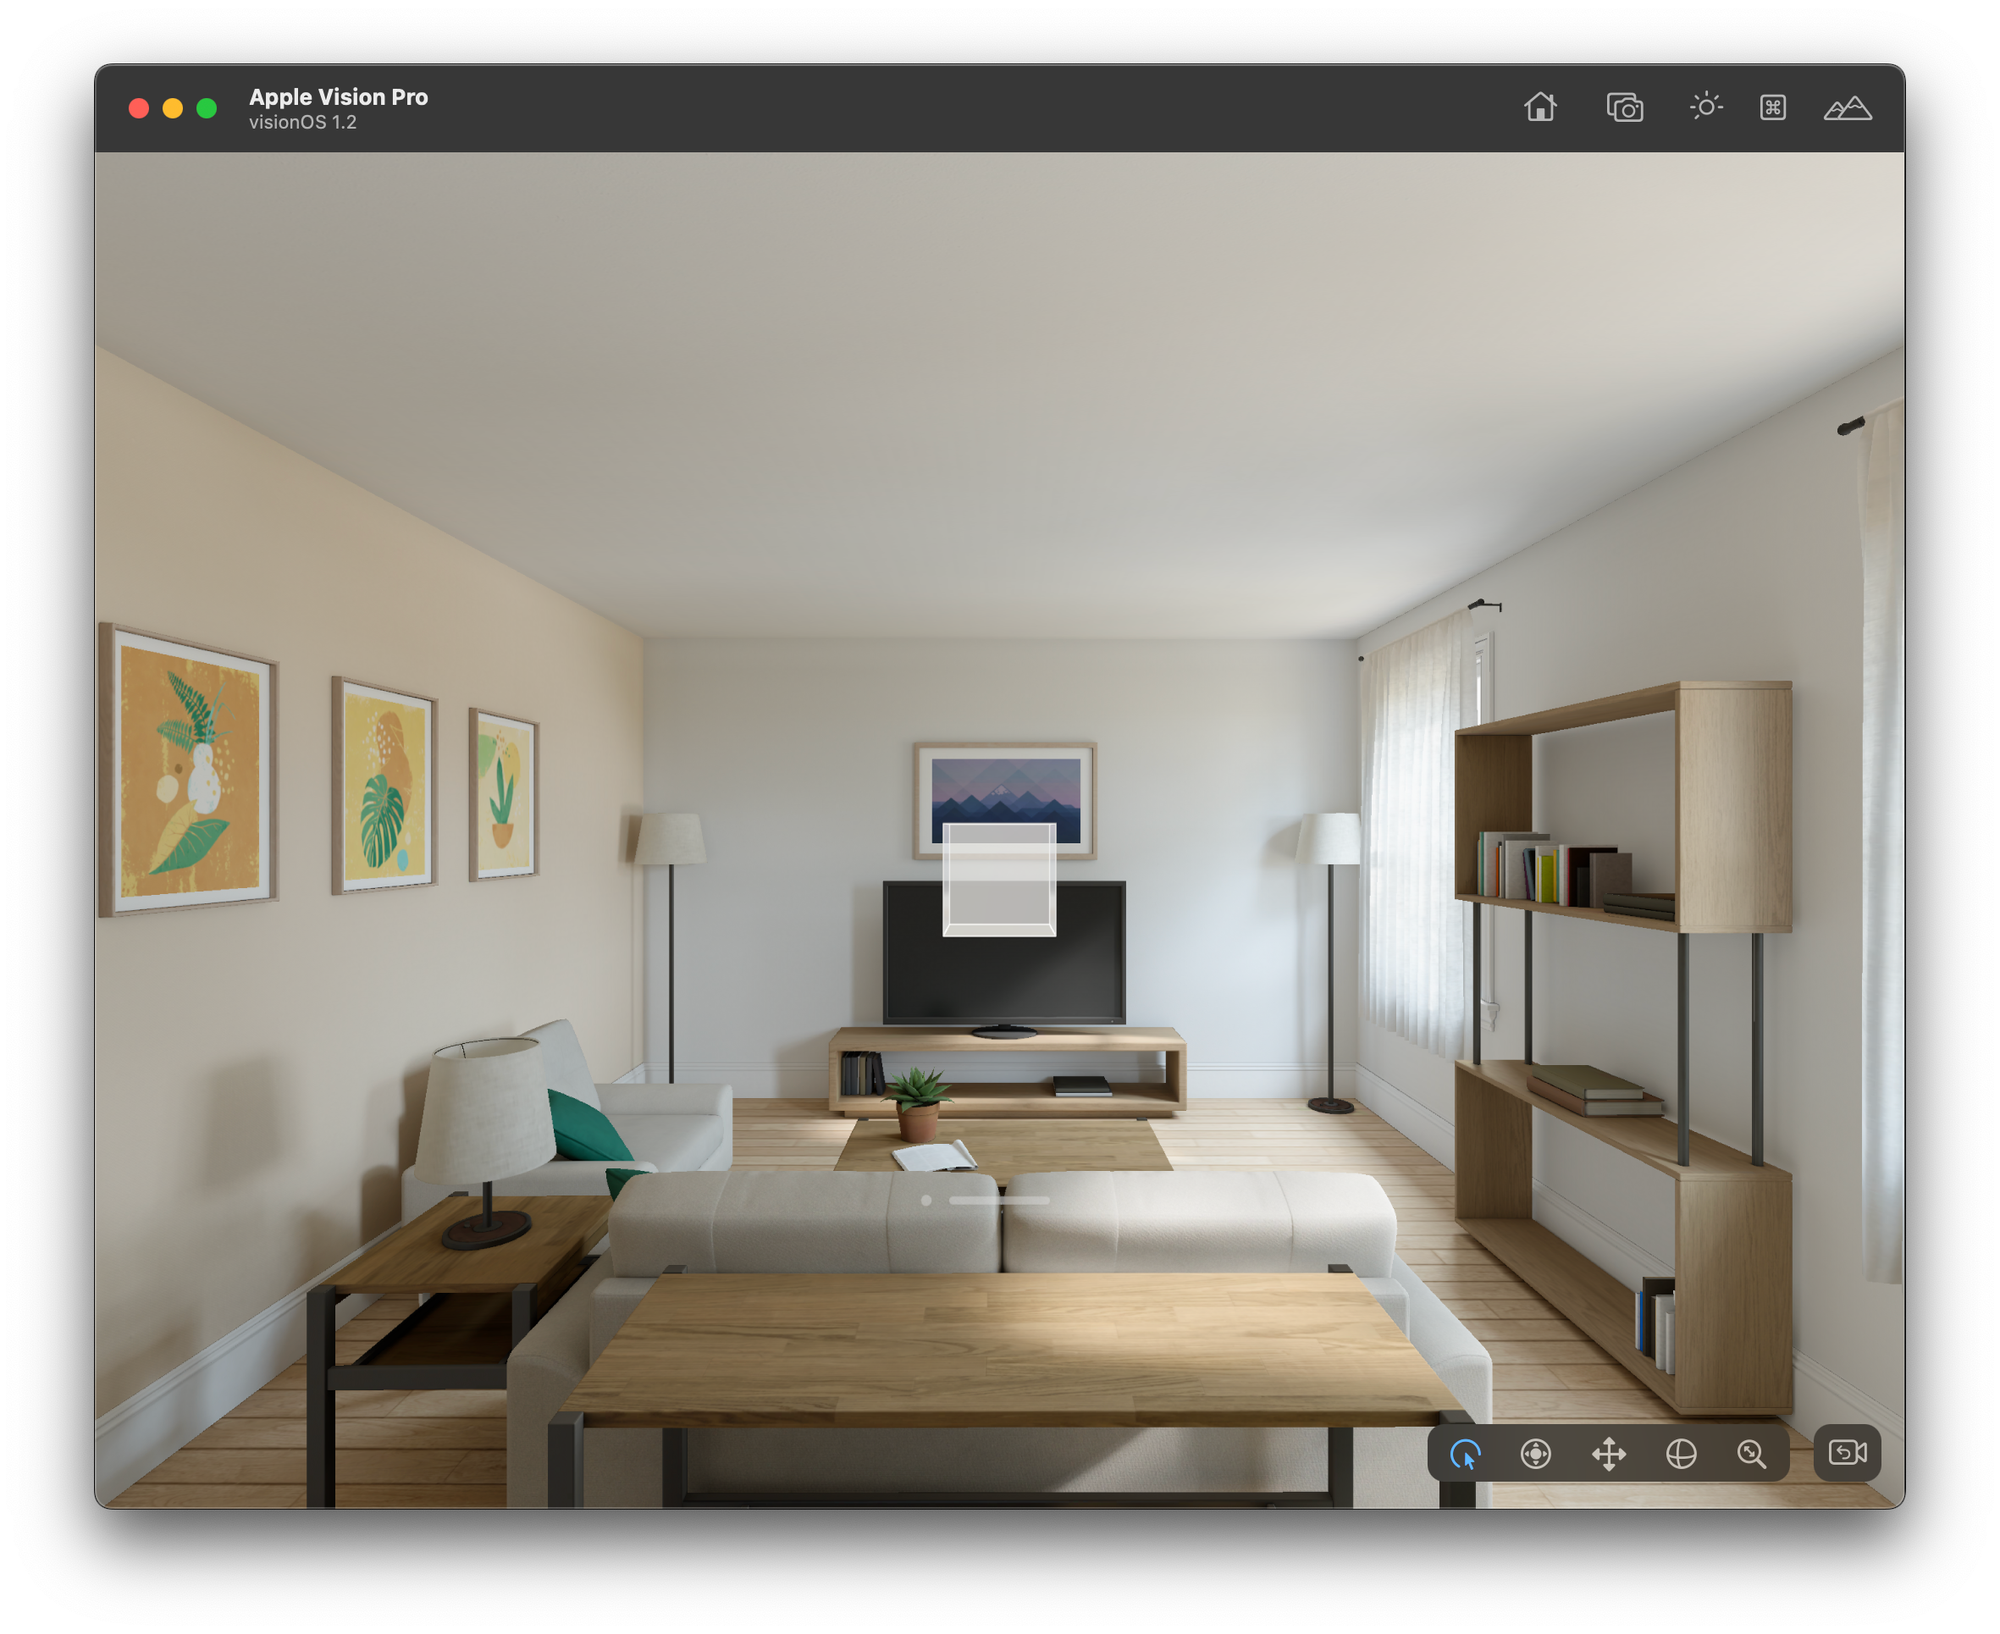  A screenshot from the Apple Vision Pro simulator showing a the GlassCube 3D model rendered in a living room.